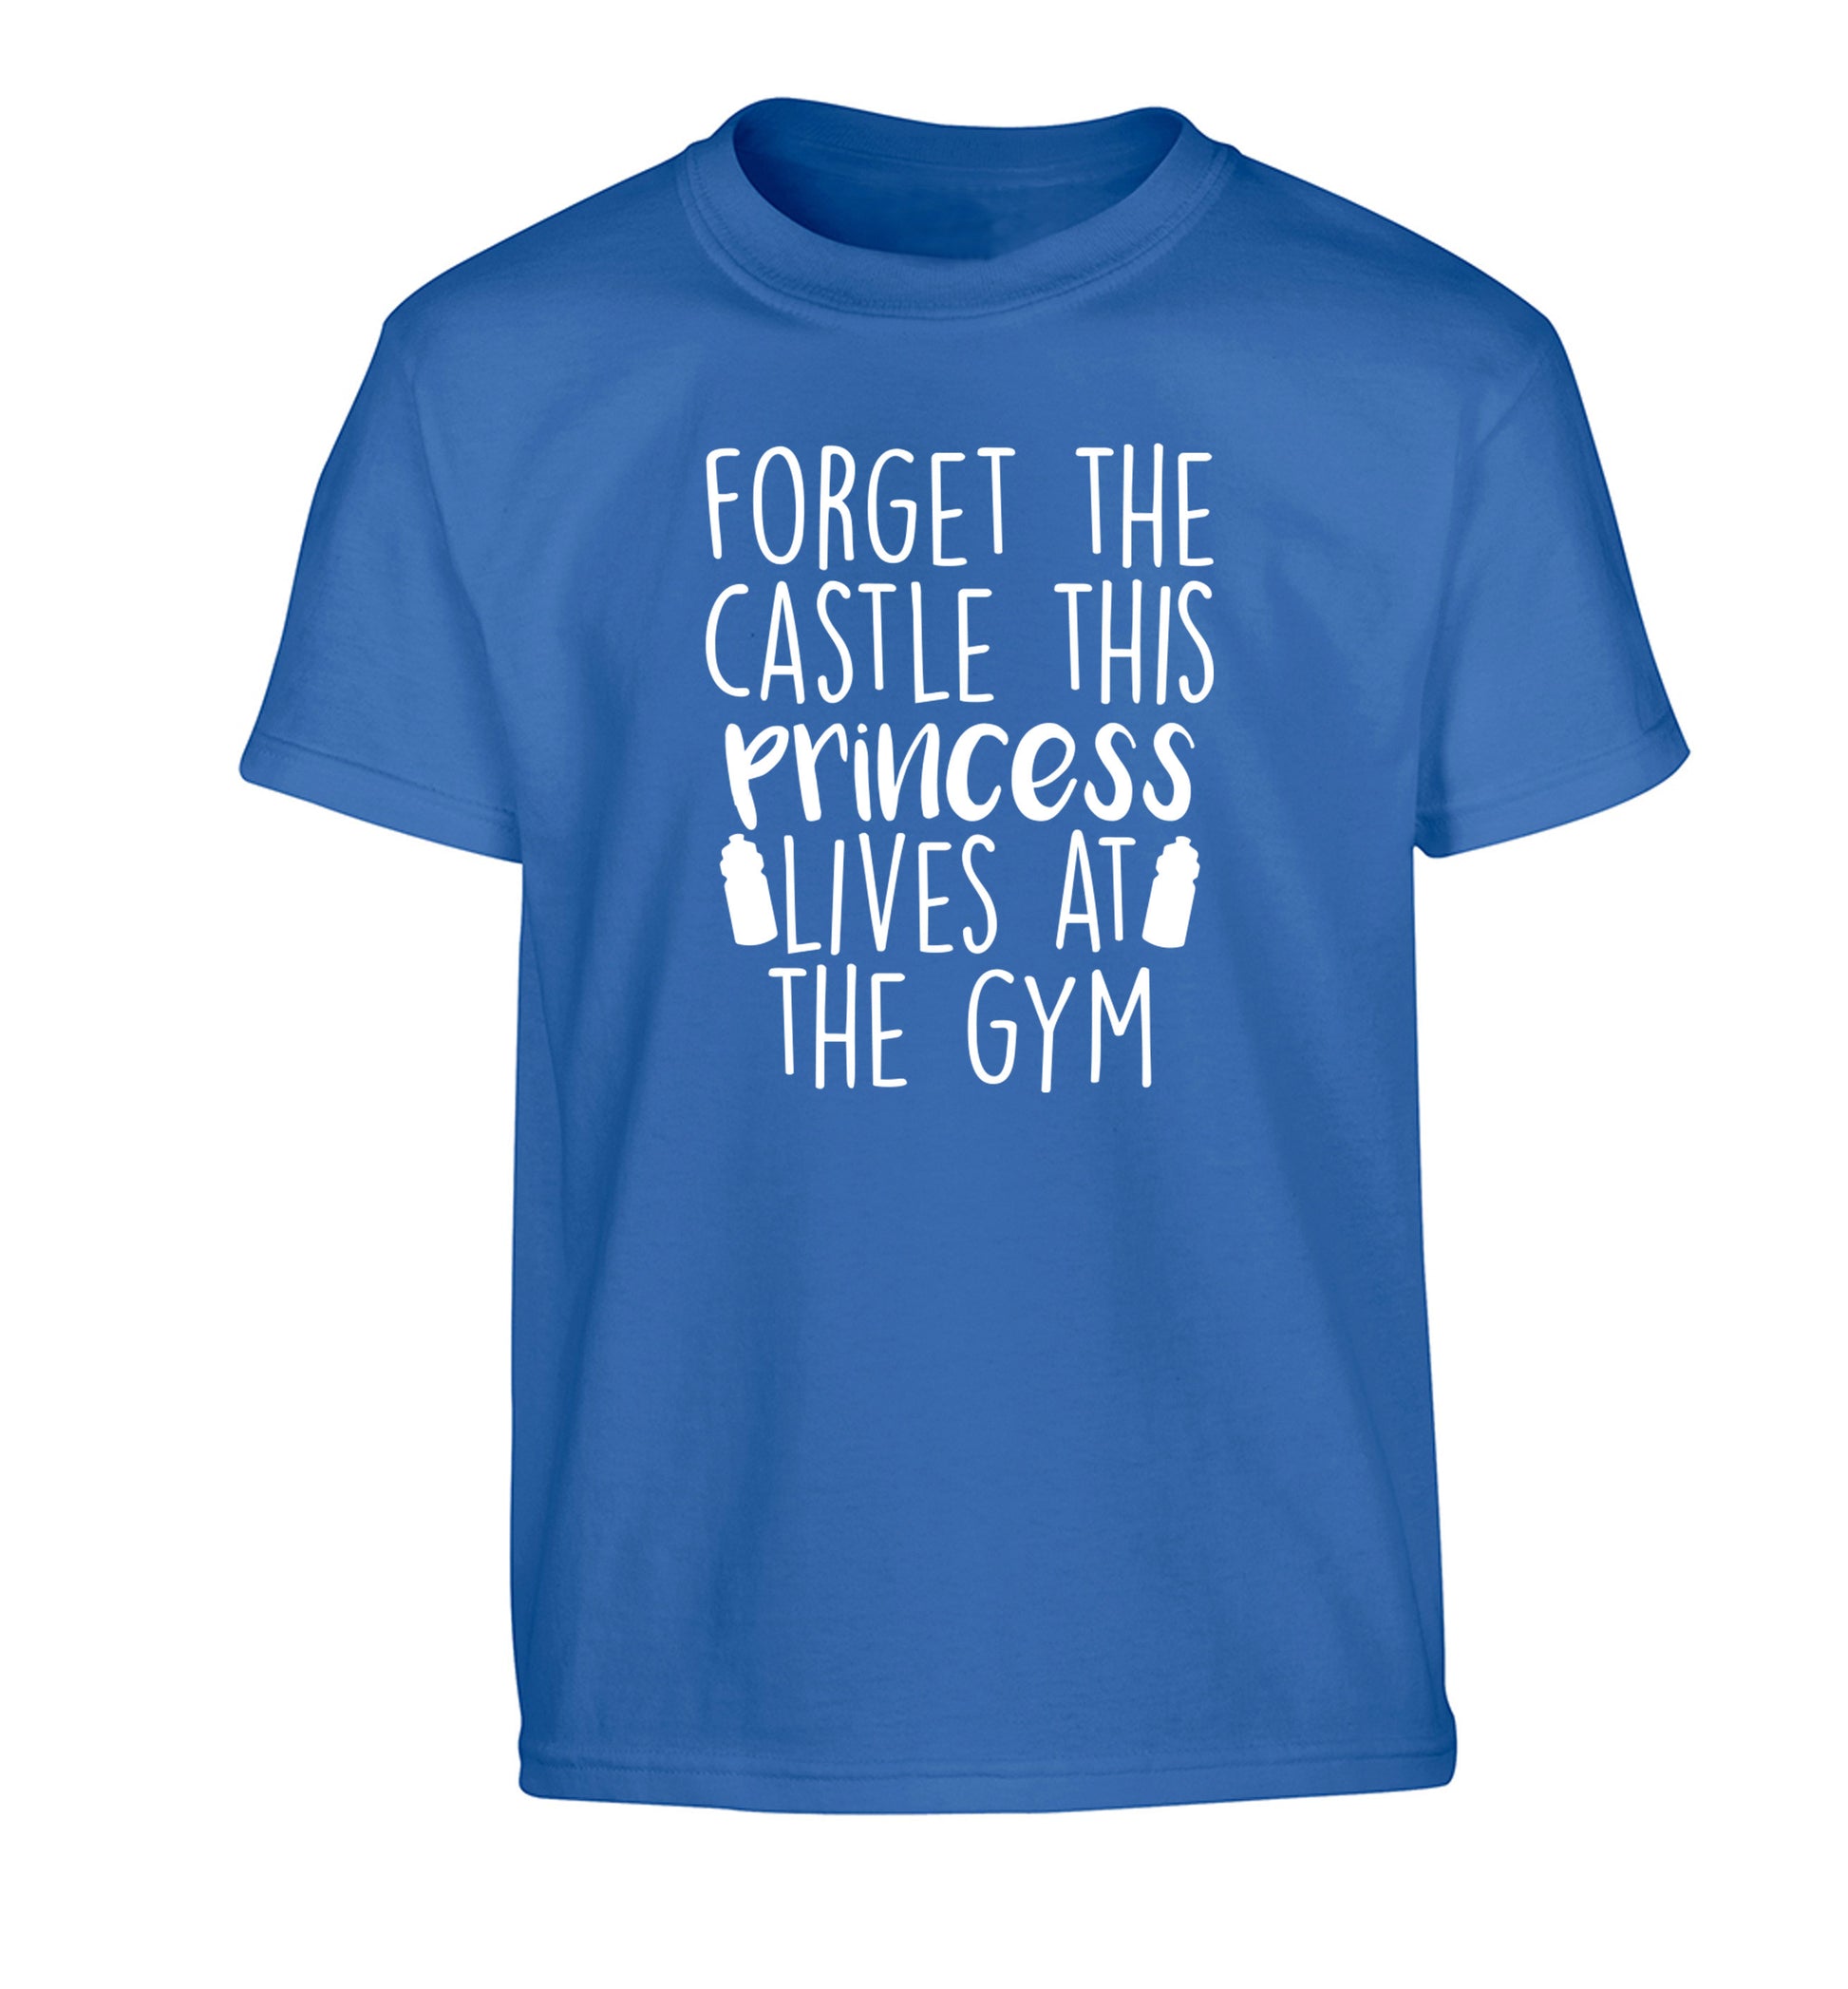 Forget the castle this princess lives at the gym Children's blue Tshirt 12-14 Years